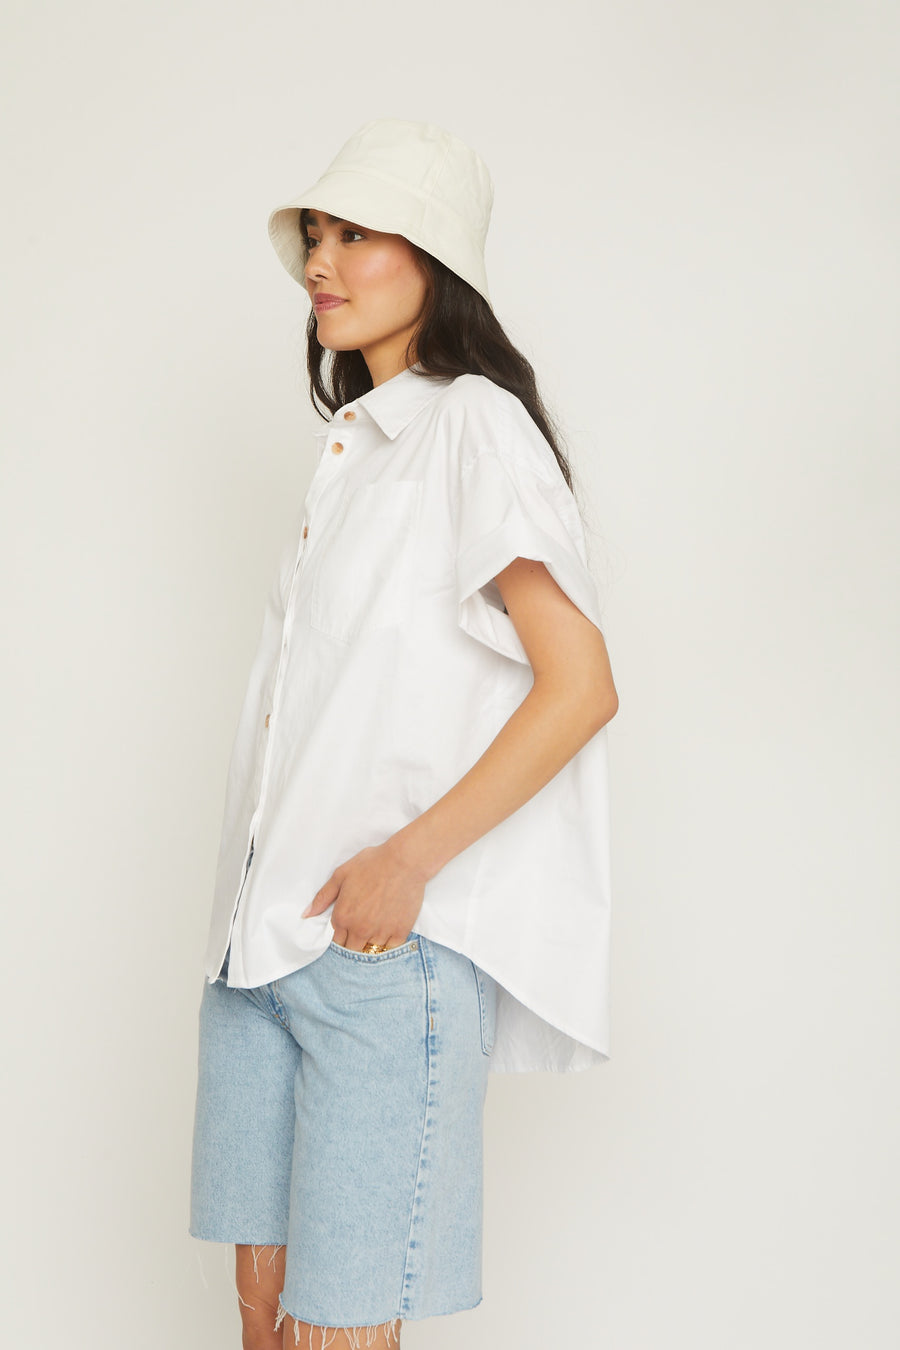 No Srcipt image - Images of 1 of 7 white button down shirt, 100% cotton, short sleeve, boxy, oversized fit, light-weight